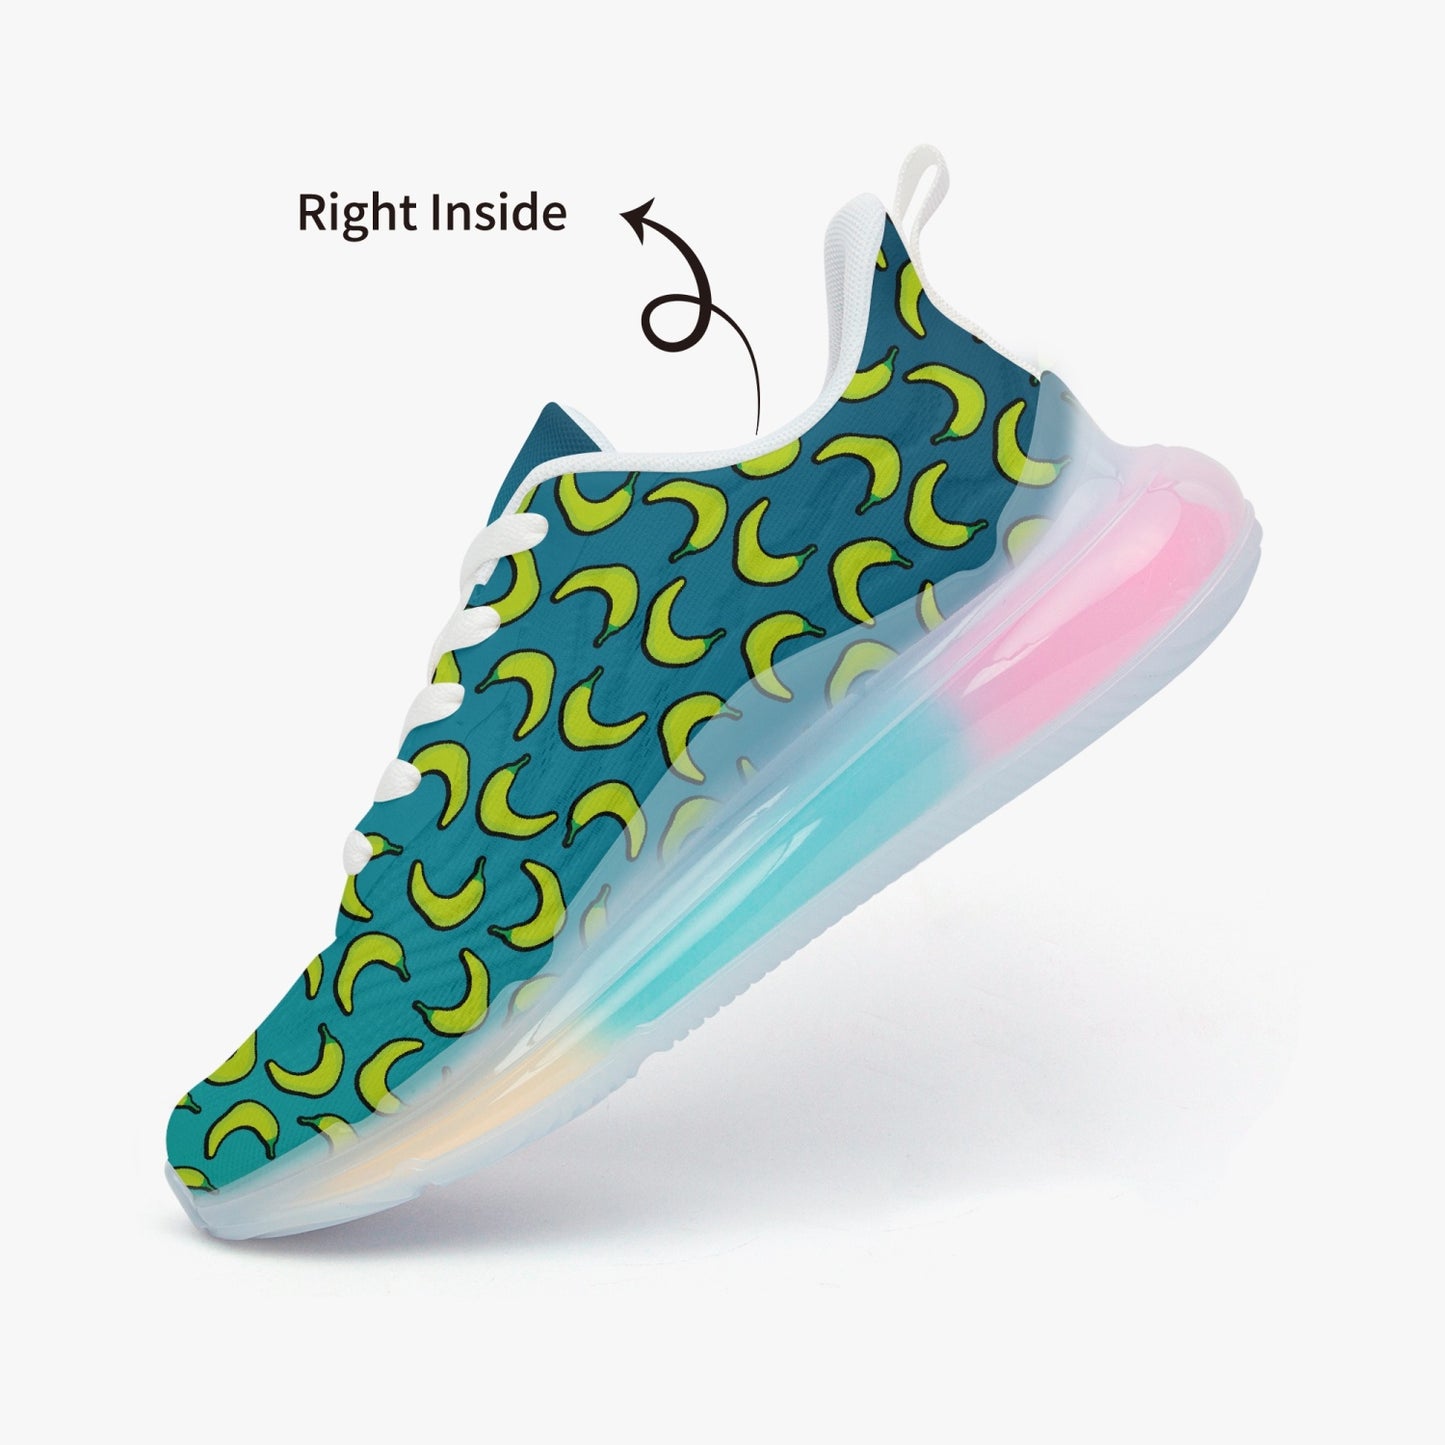 Weirdo | Humor. These sneakers are here to spice up your feet! The lightweight women’s sneakers have these green, hot peppers printed on them. The shoes are comfy to!